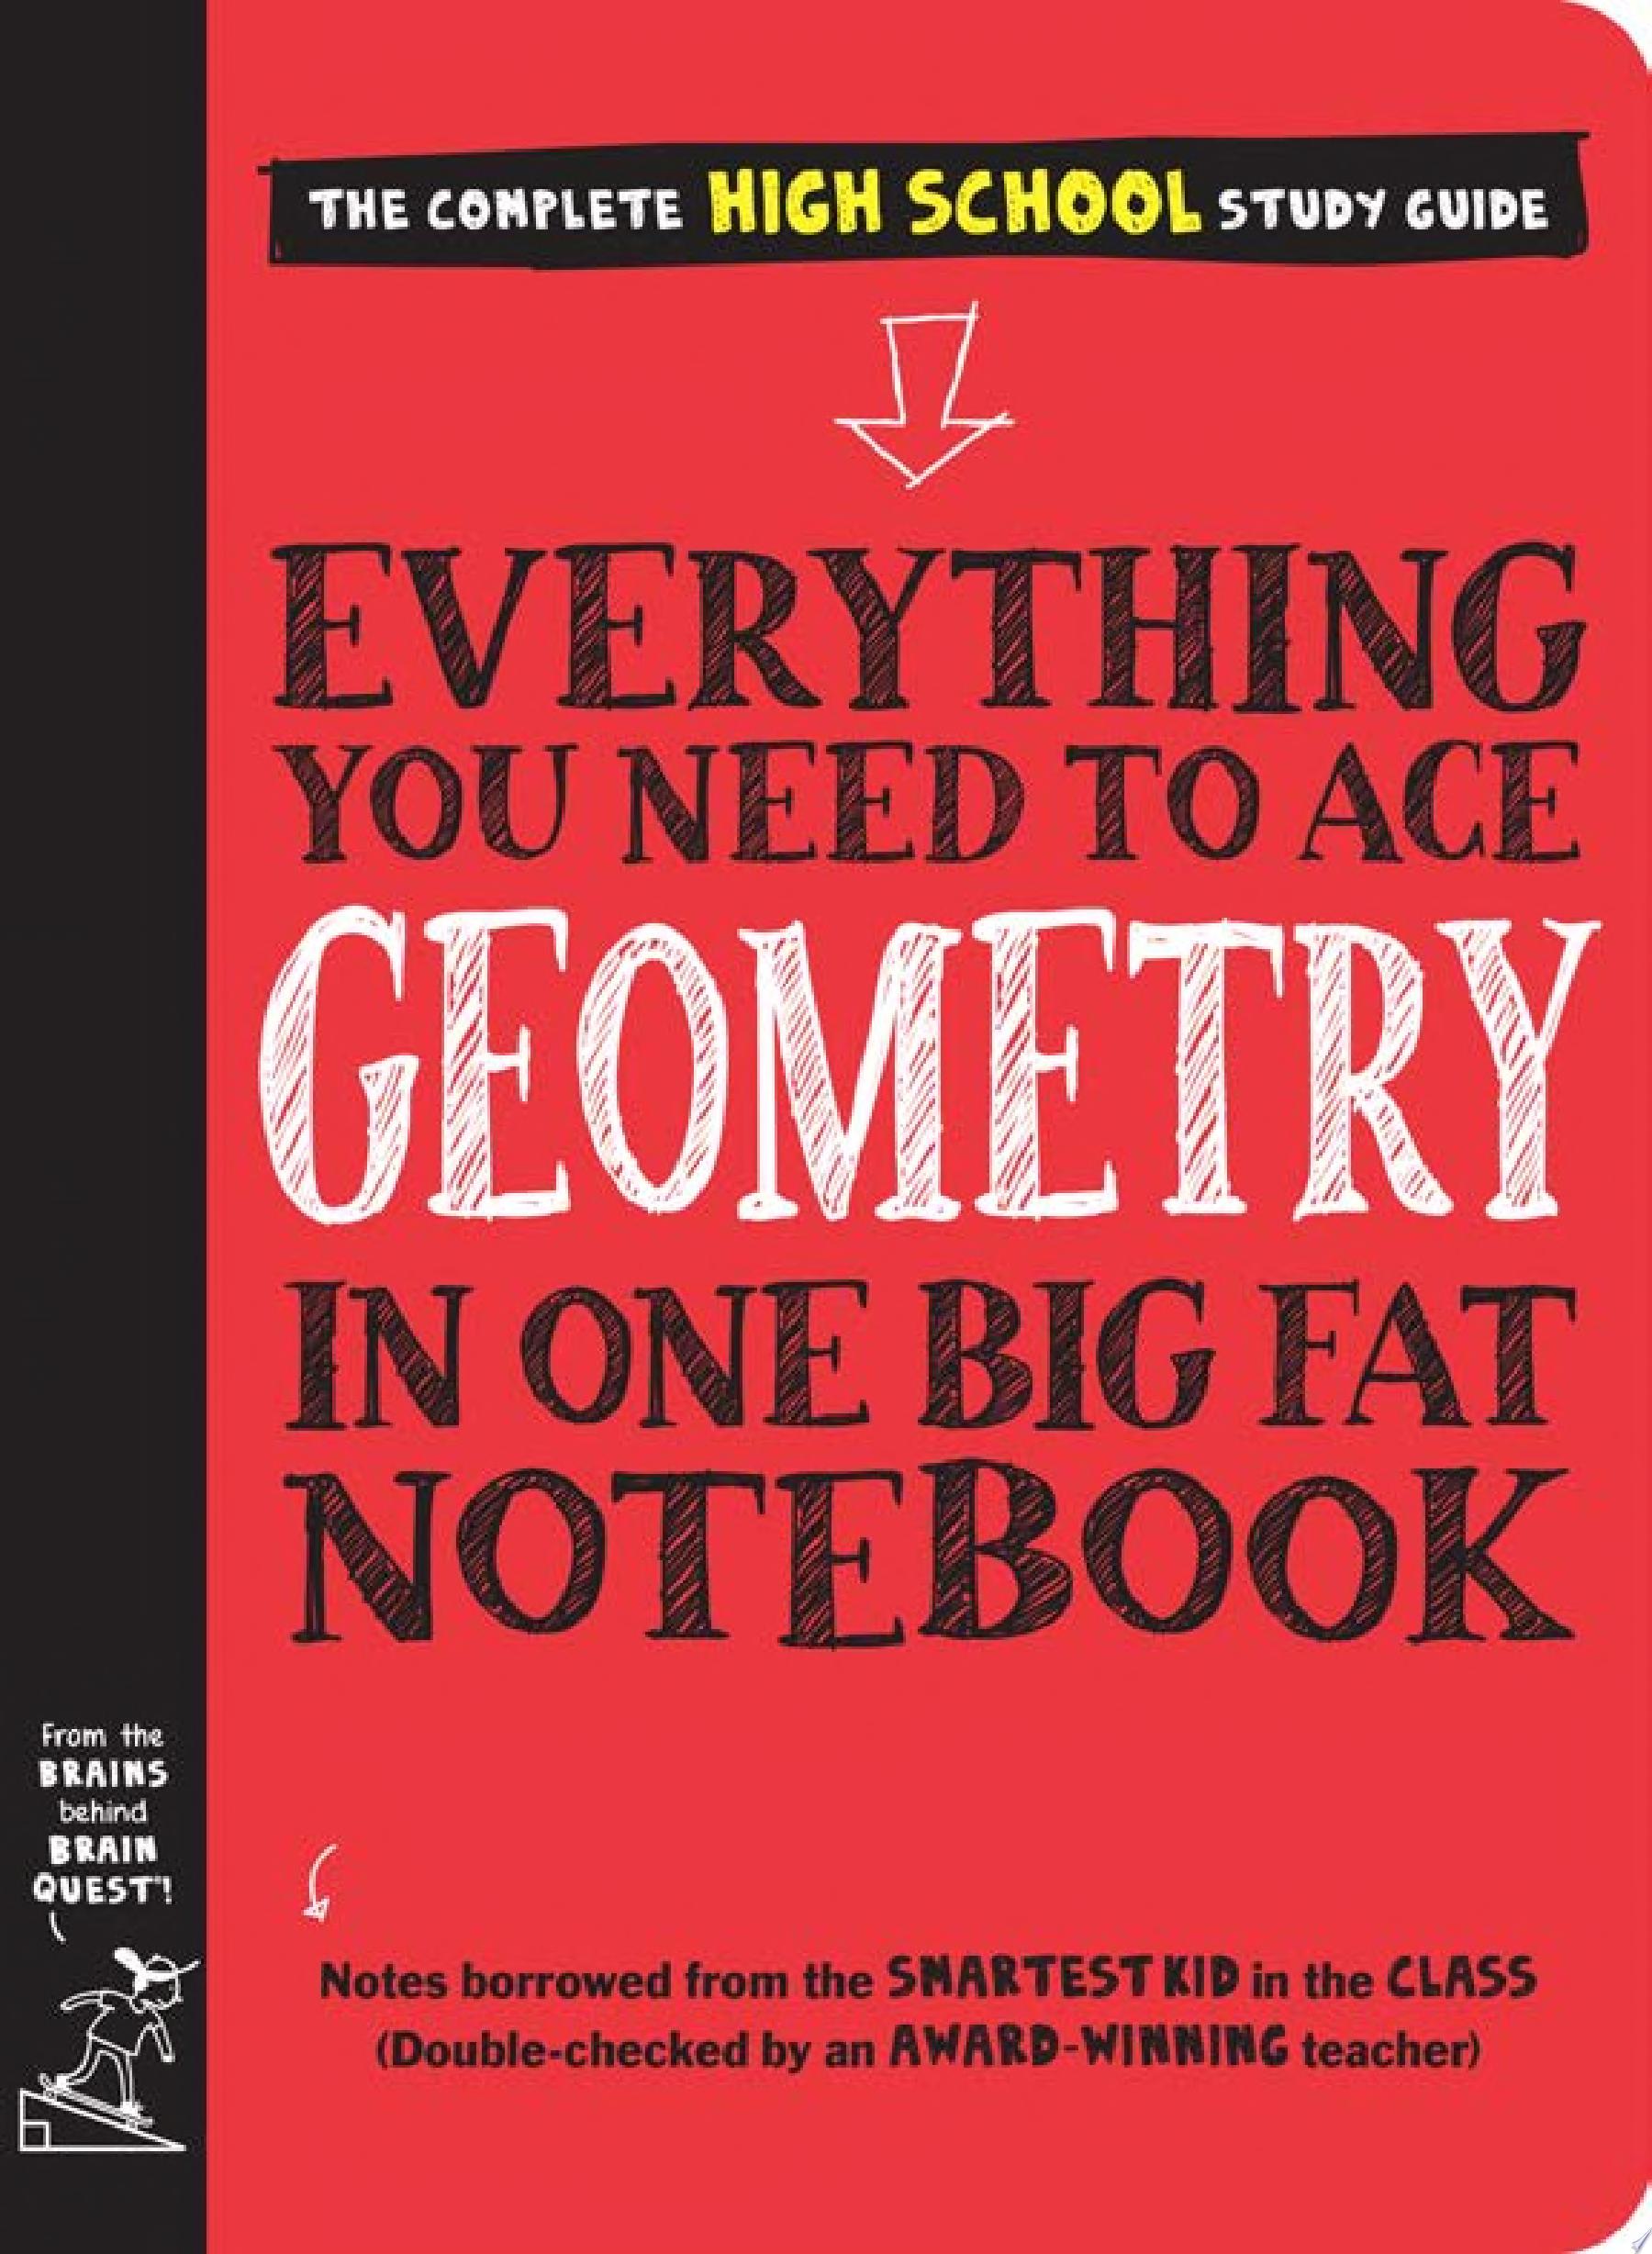 Image for "Everything You Need to Ace Geometry in One Big Fat Notebook"